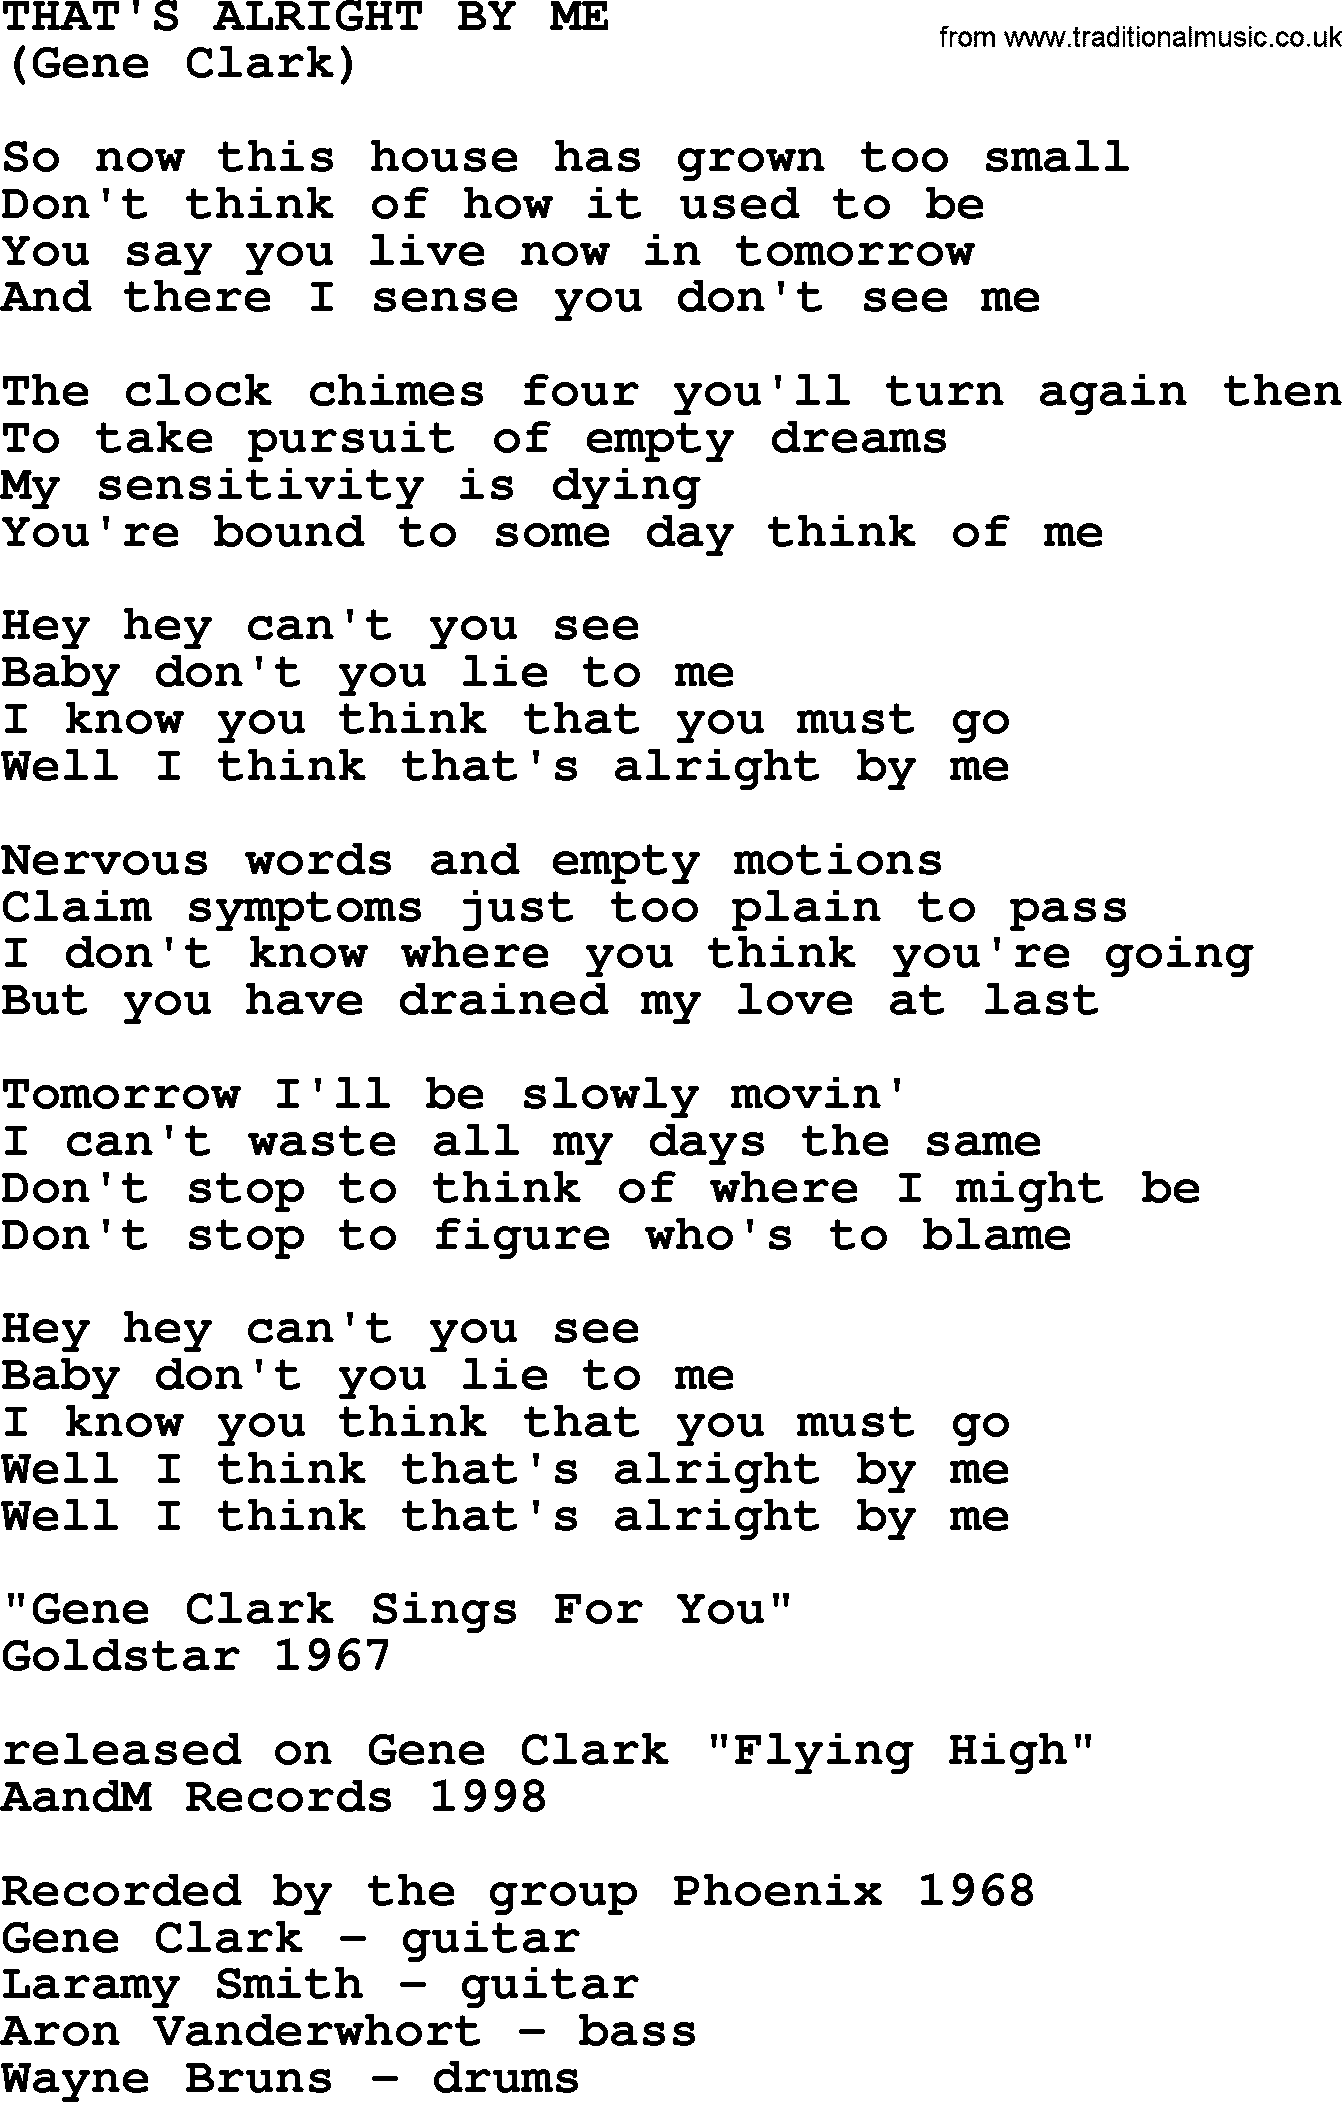 The Byrds song That's Alright By Me, lyrics